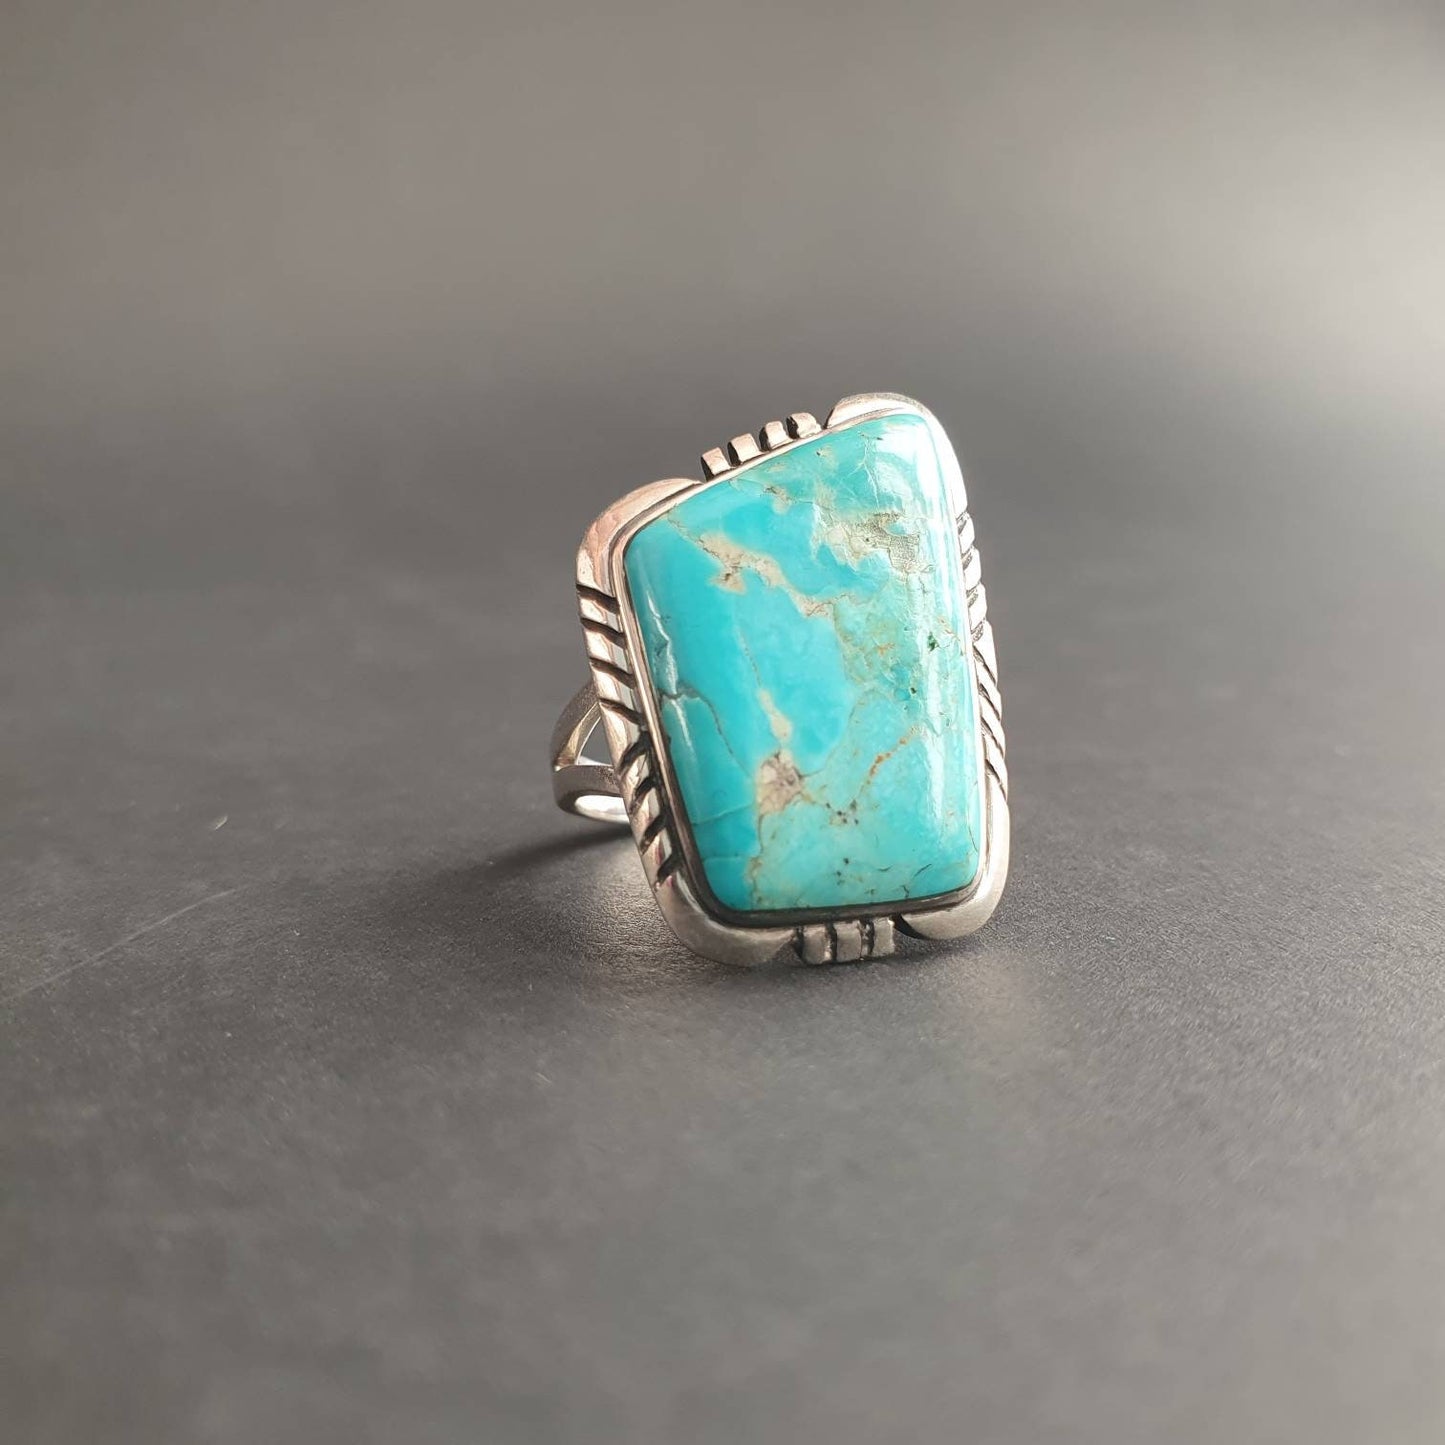 Turquoise ring, Navajo ring,signed jewellery, indian South Western ring,Turquoise gemstone, Unisex ring,statement ring,